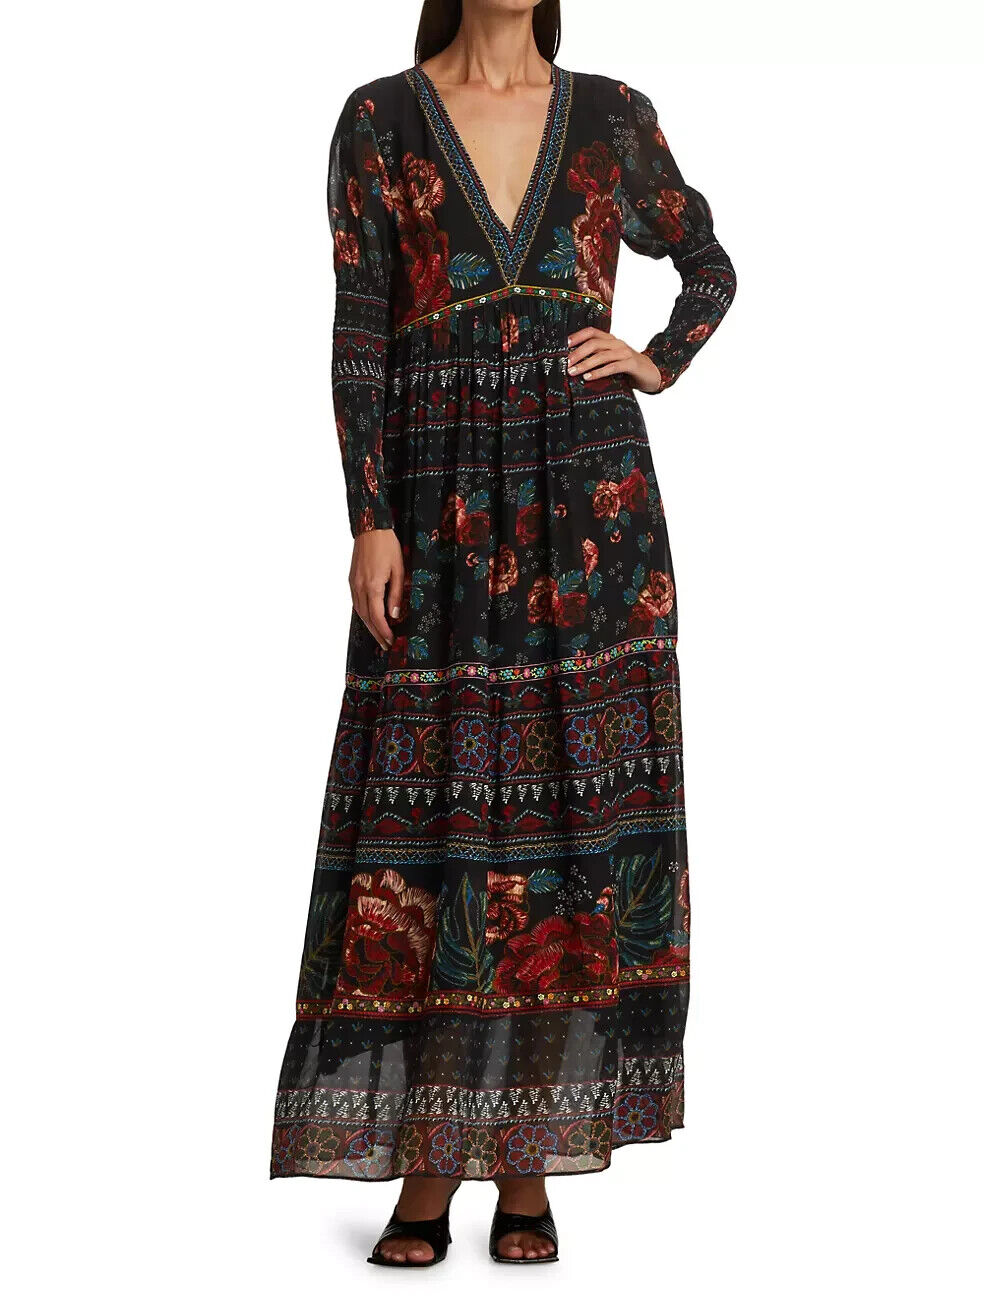 Farm Rio Embroidered Floral Maxi Dress Size XS NEW $295